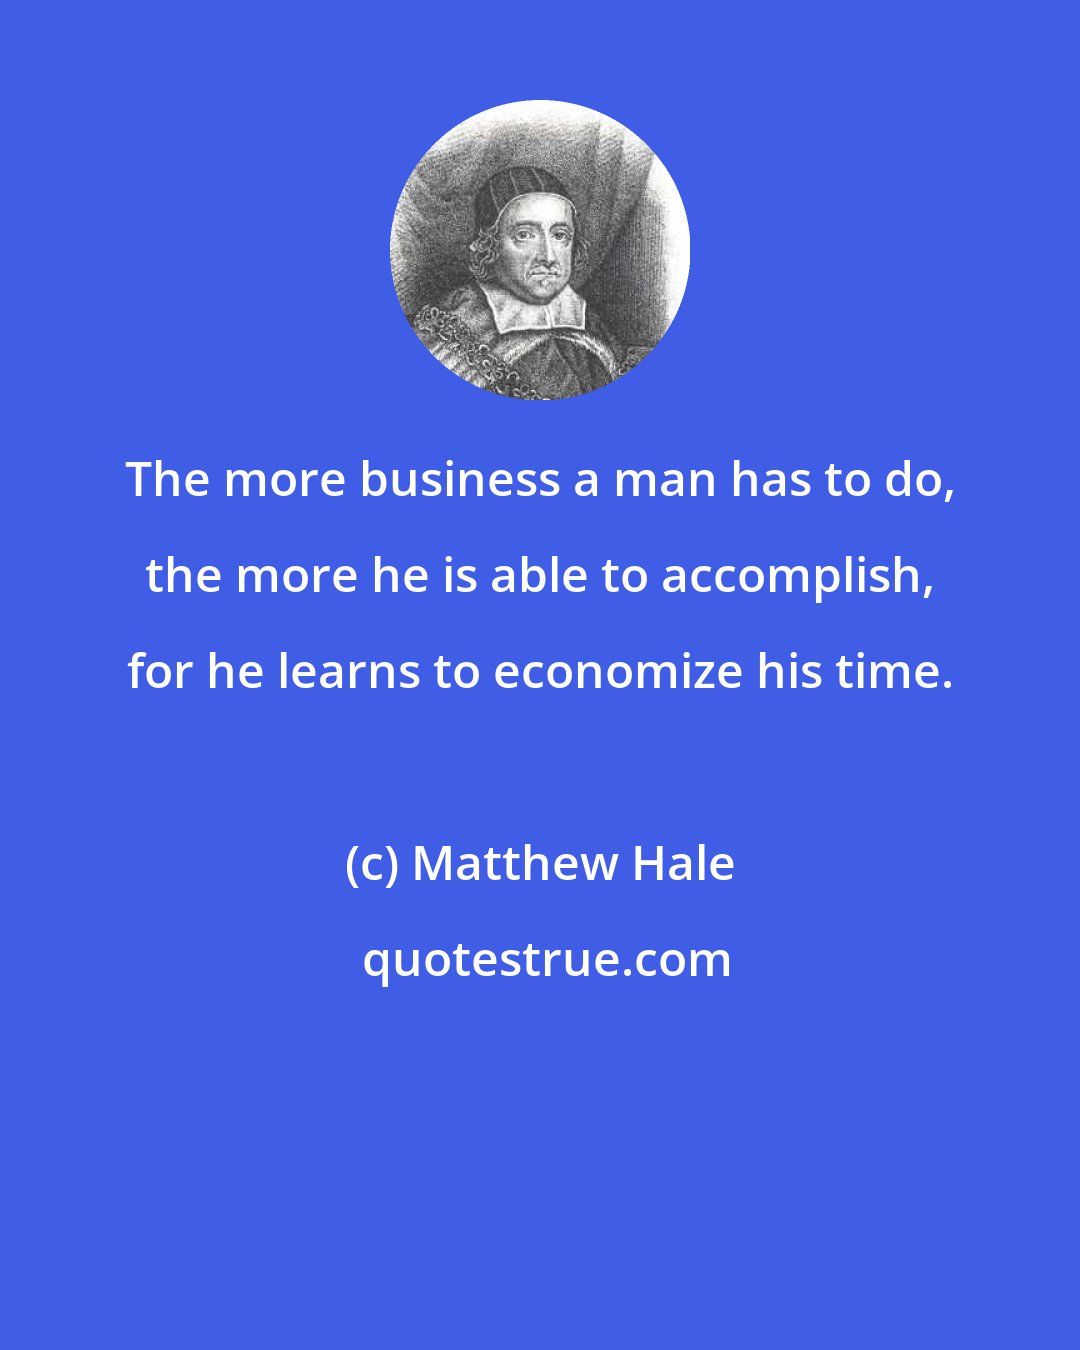 Matthew Hale: The more business a man has to do, the more he is able to accomplish, for he learns to economize his time.